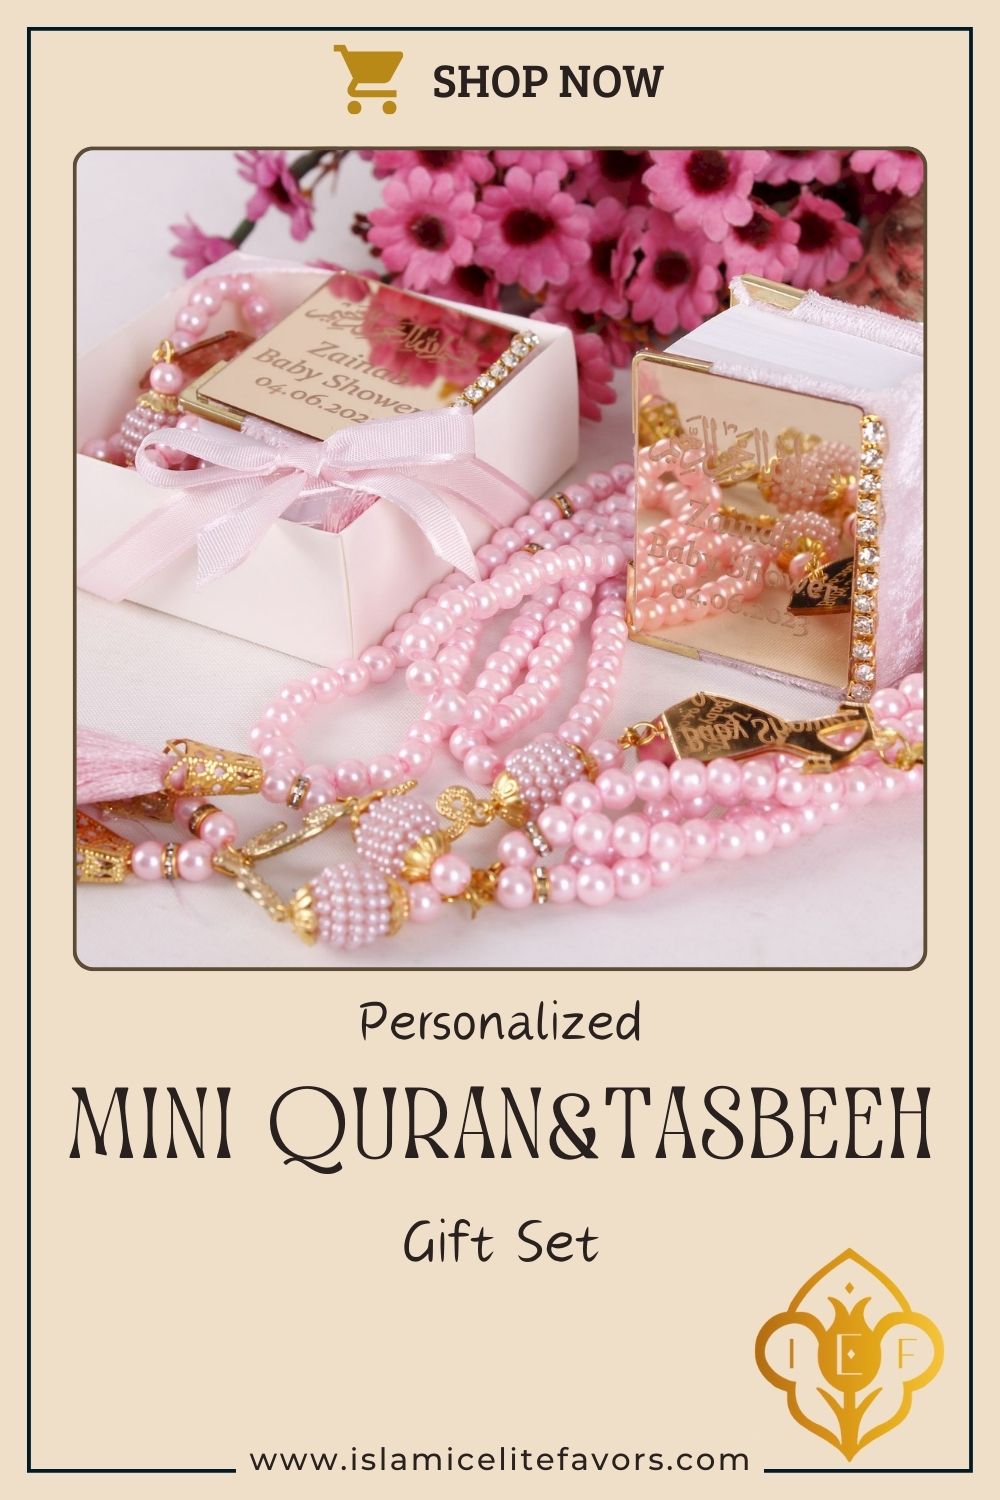 Personalized Mini Quran Pearl Prayer Beads Baby Shower Favor for Girls - Islamic Elite Favors is a handmade gift shop offering a wide variety of unique and personalized gifts for all occasions. Whether you're looking for the perfect Ramadan, Eid, Hajj, wedding gift or something special for a birthday, baby shower or anniversary, we have something for everyone. High quality, made with love.